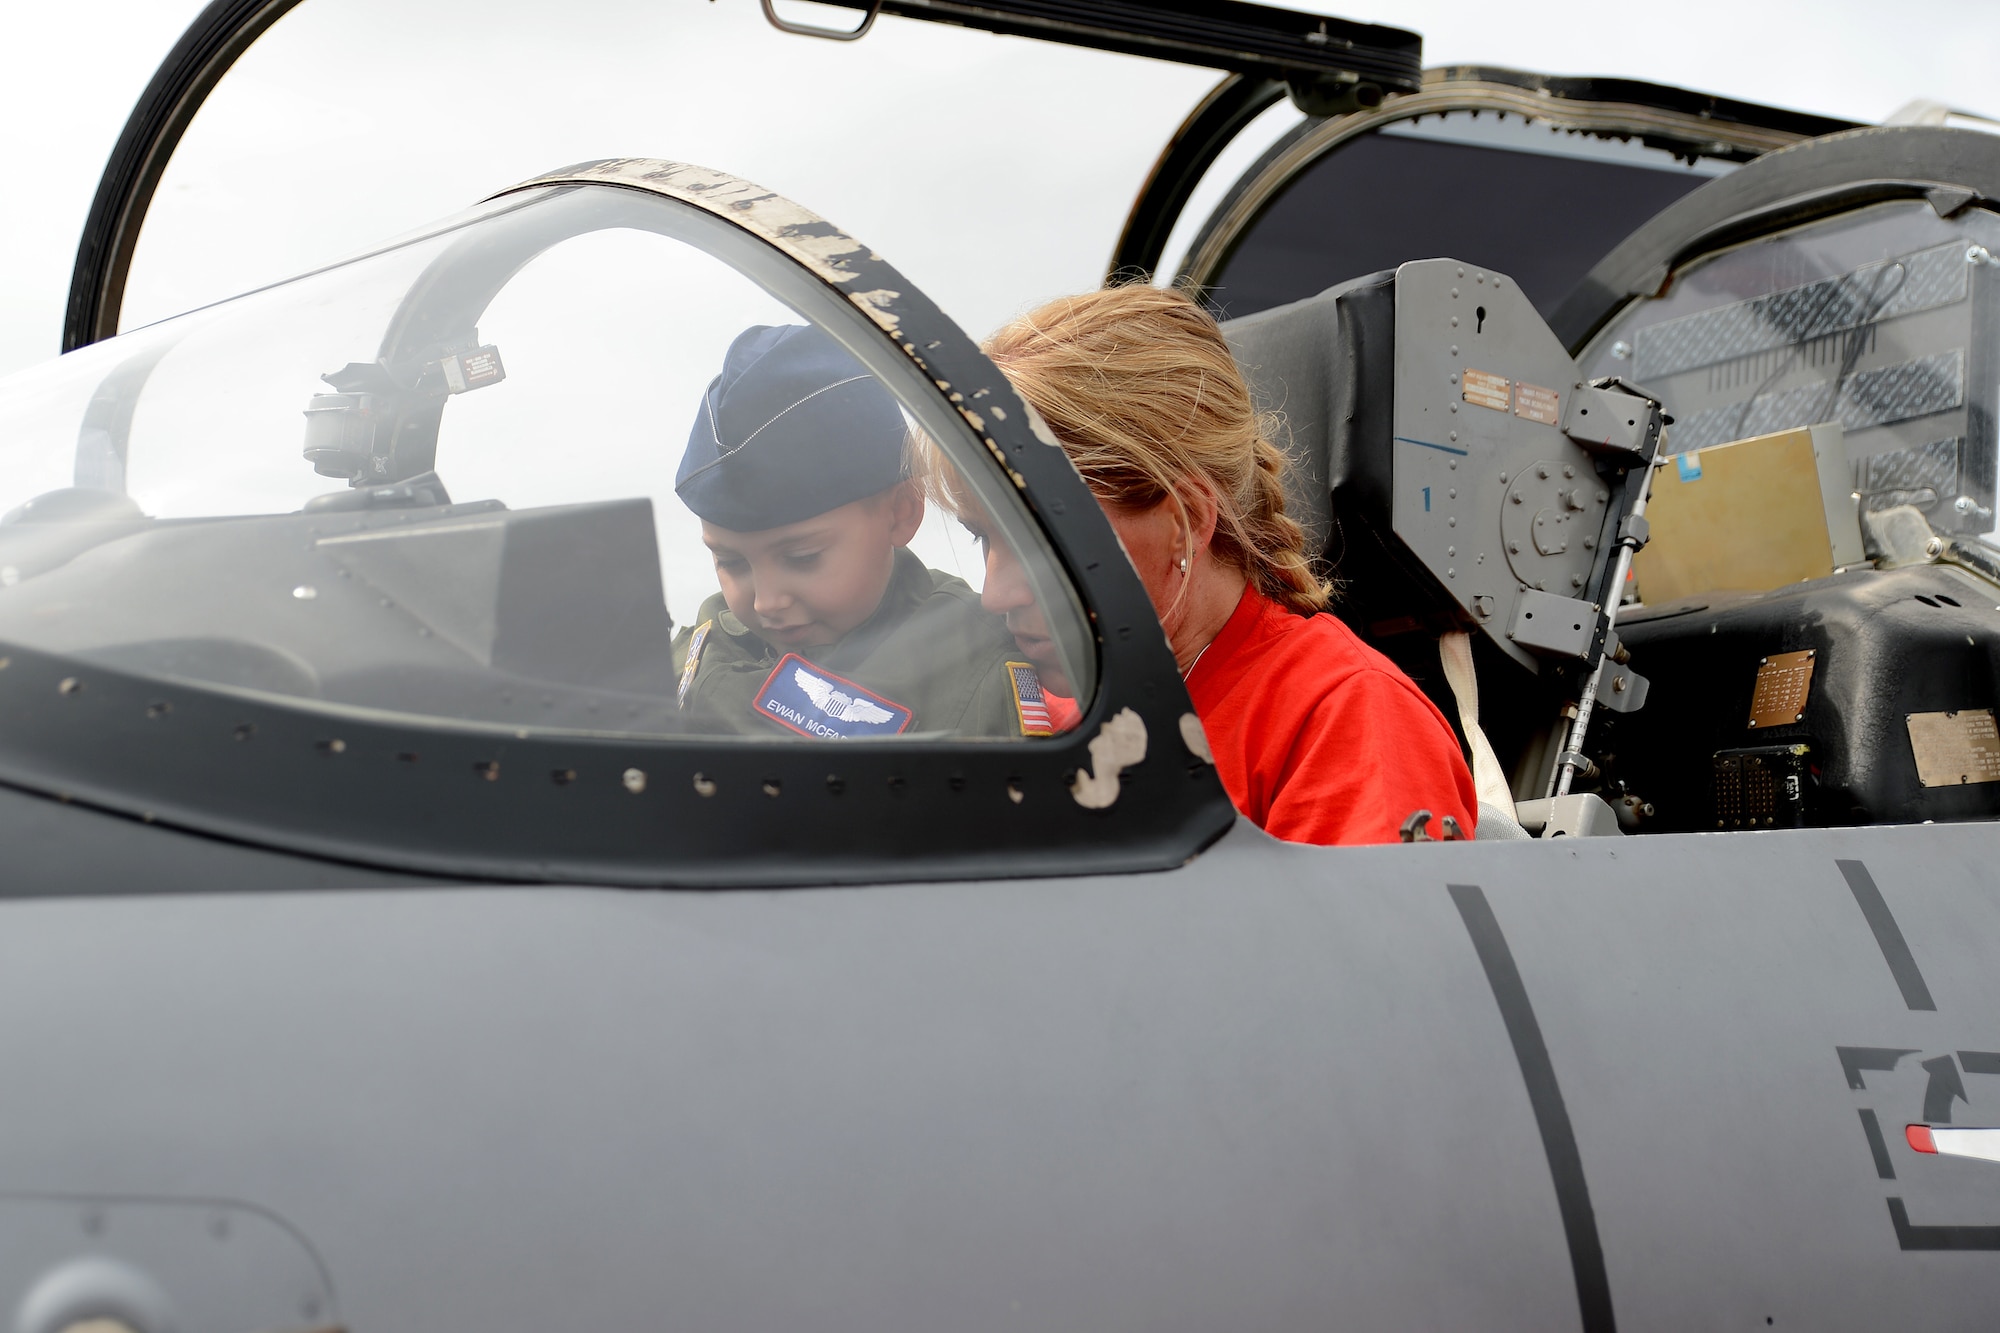 Ewan McFadgen, Pilot for a Day, and his mother Melissa, look at the controls of an Aero L-39 Albatros July 10, 2015, during his tour of Joint Base Lewis-McChord, Wash. During his time on McChord Field, McFadgen visited some of the squadrons here such as the 4th Airlift Squadron, 627th Civil Engineer Squadron and 22nd Special Tactics Squadron.